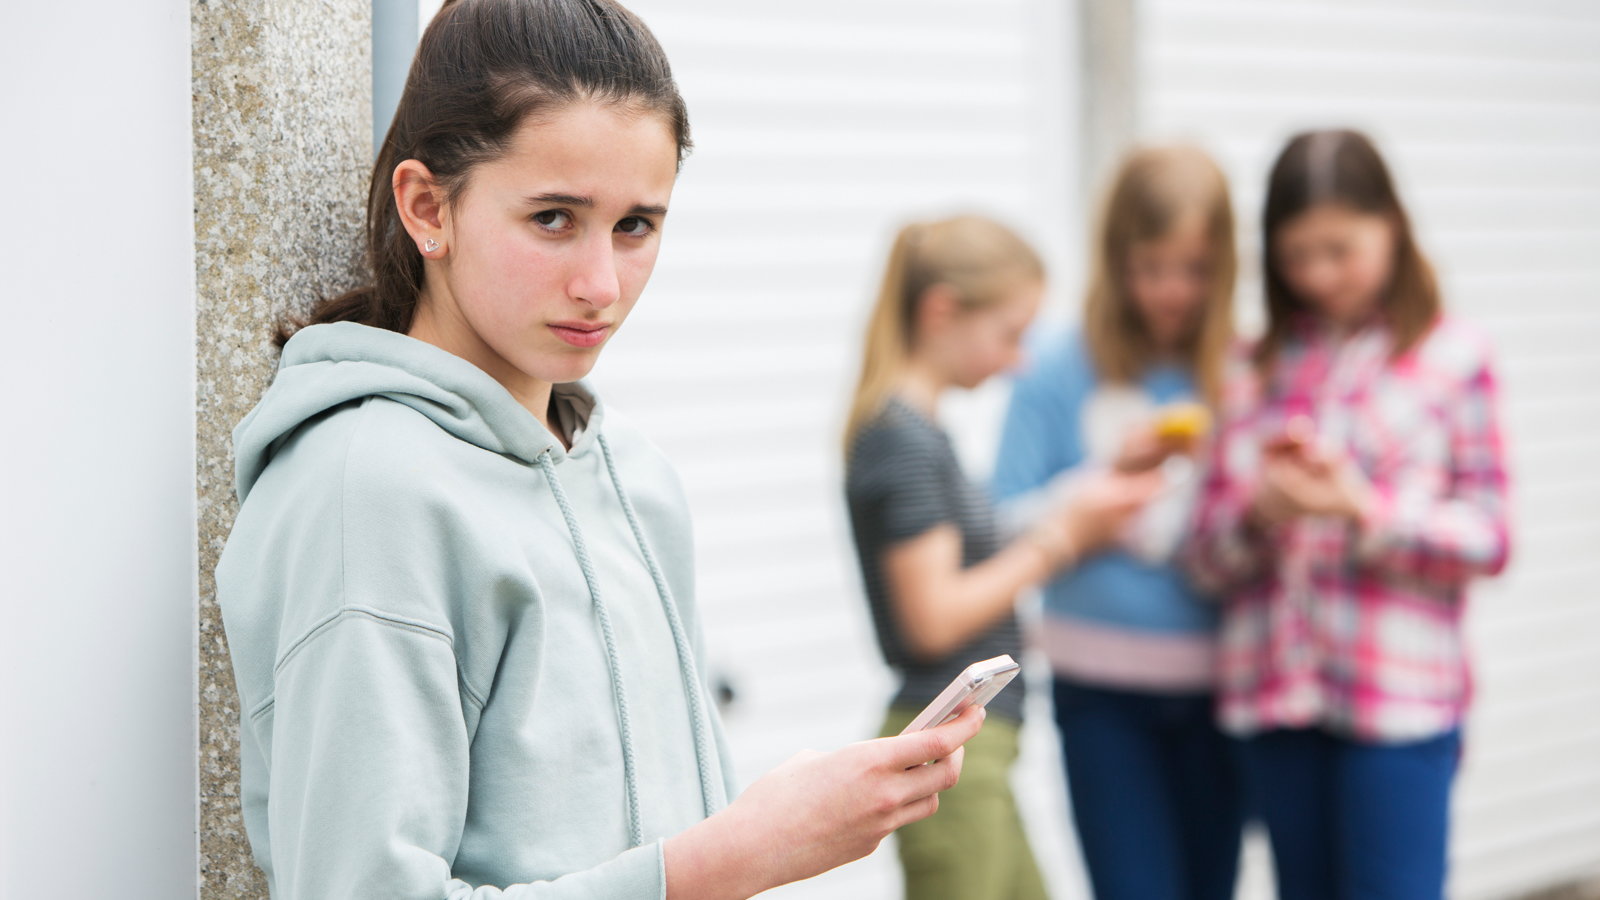 teen being bullied by text messages